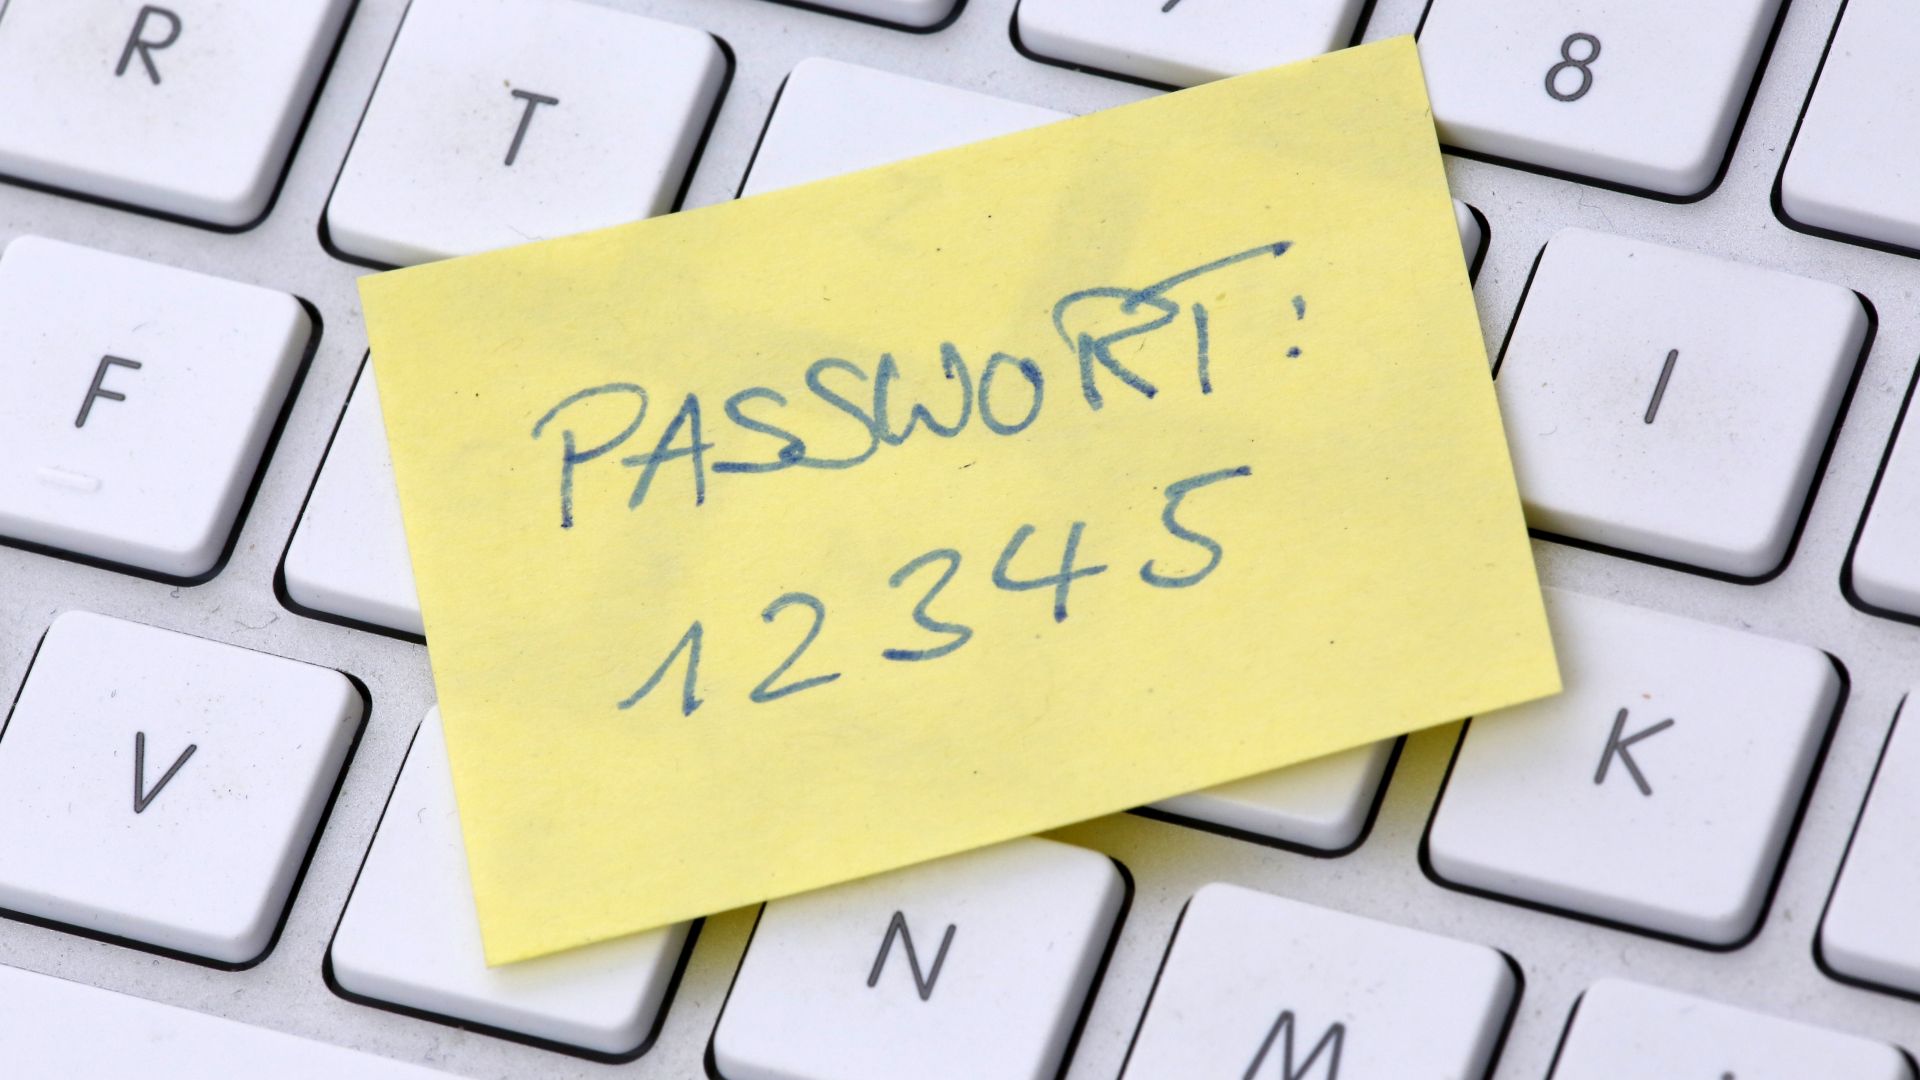 OuTthink Passwords cybersecurity security awareness